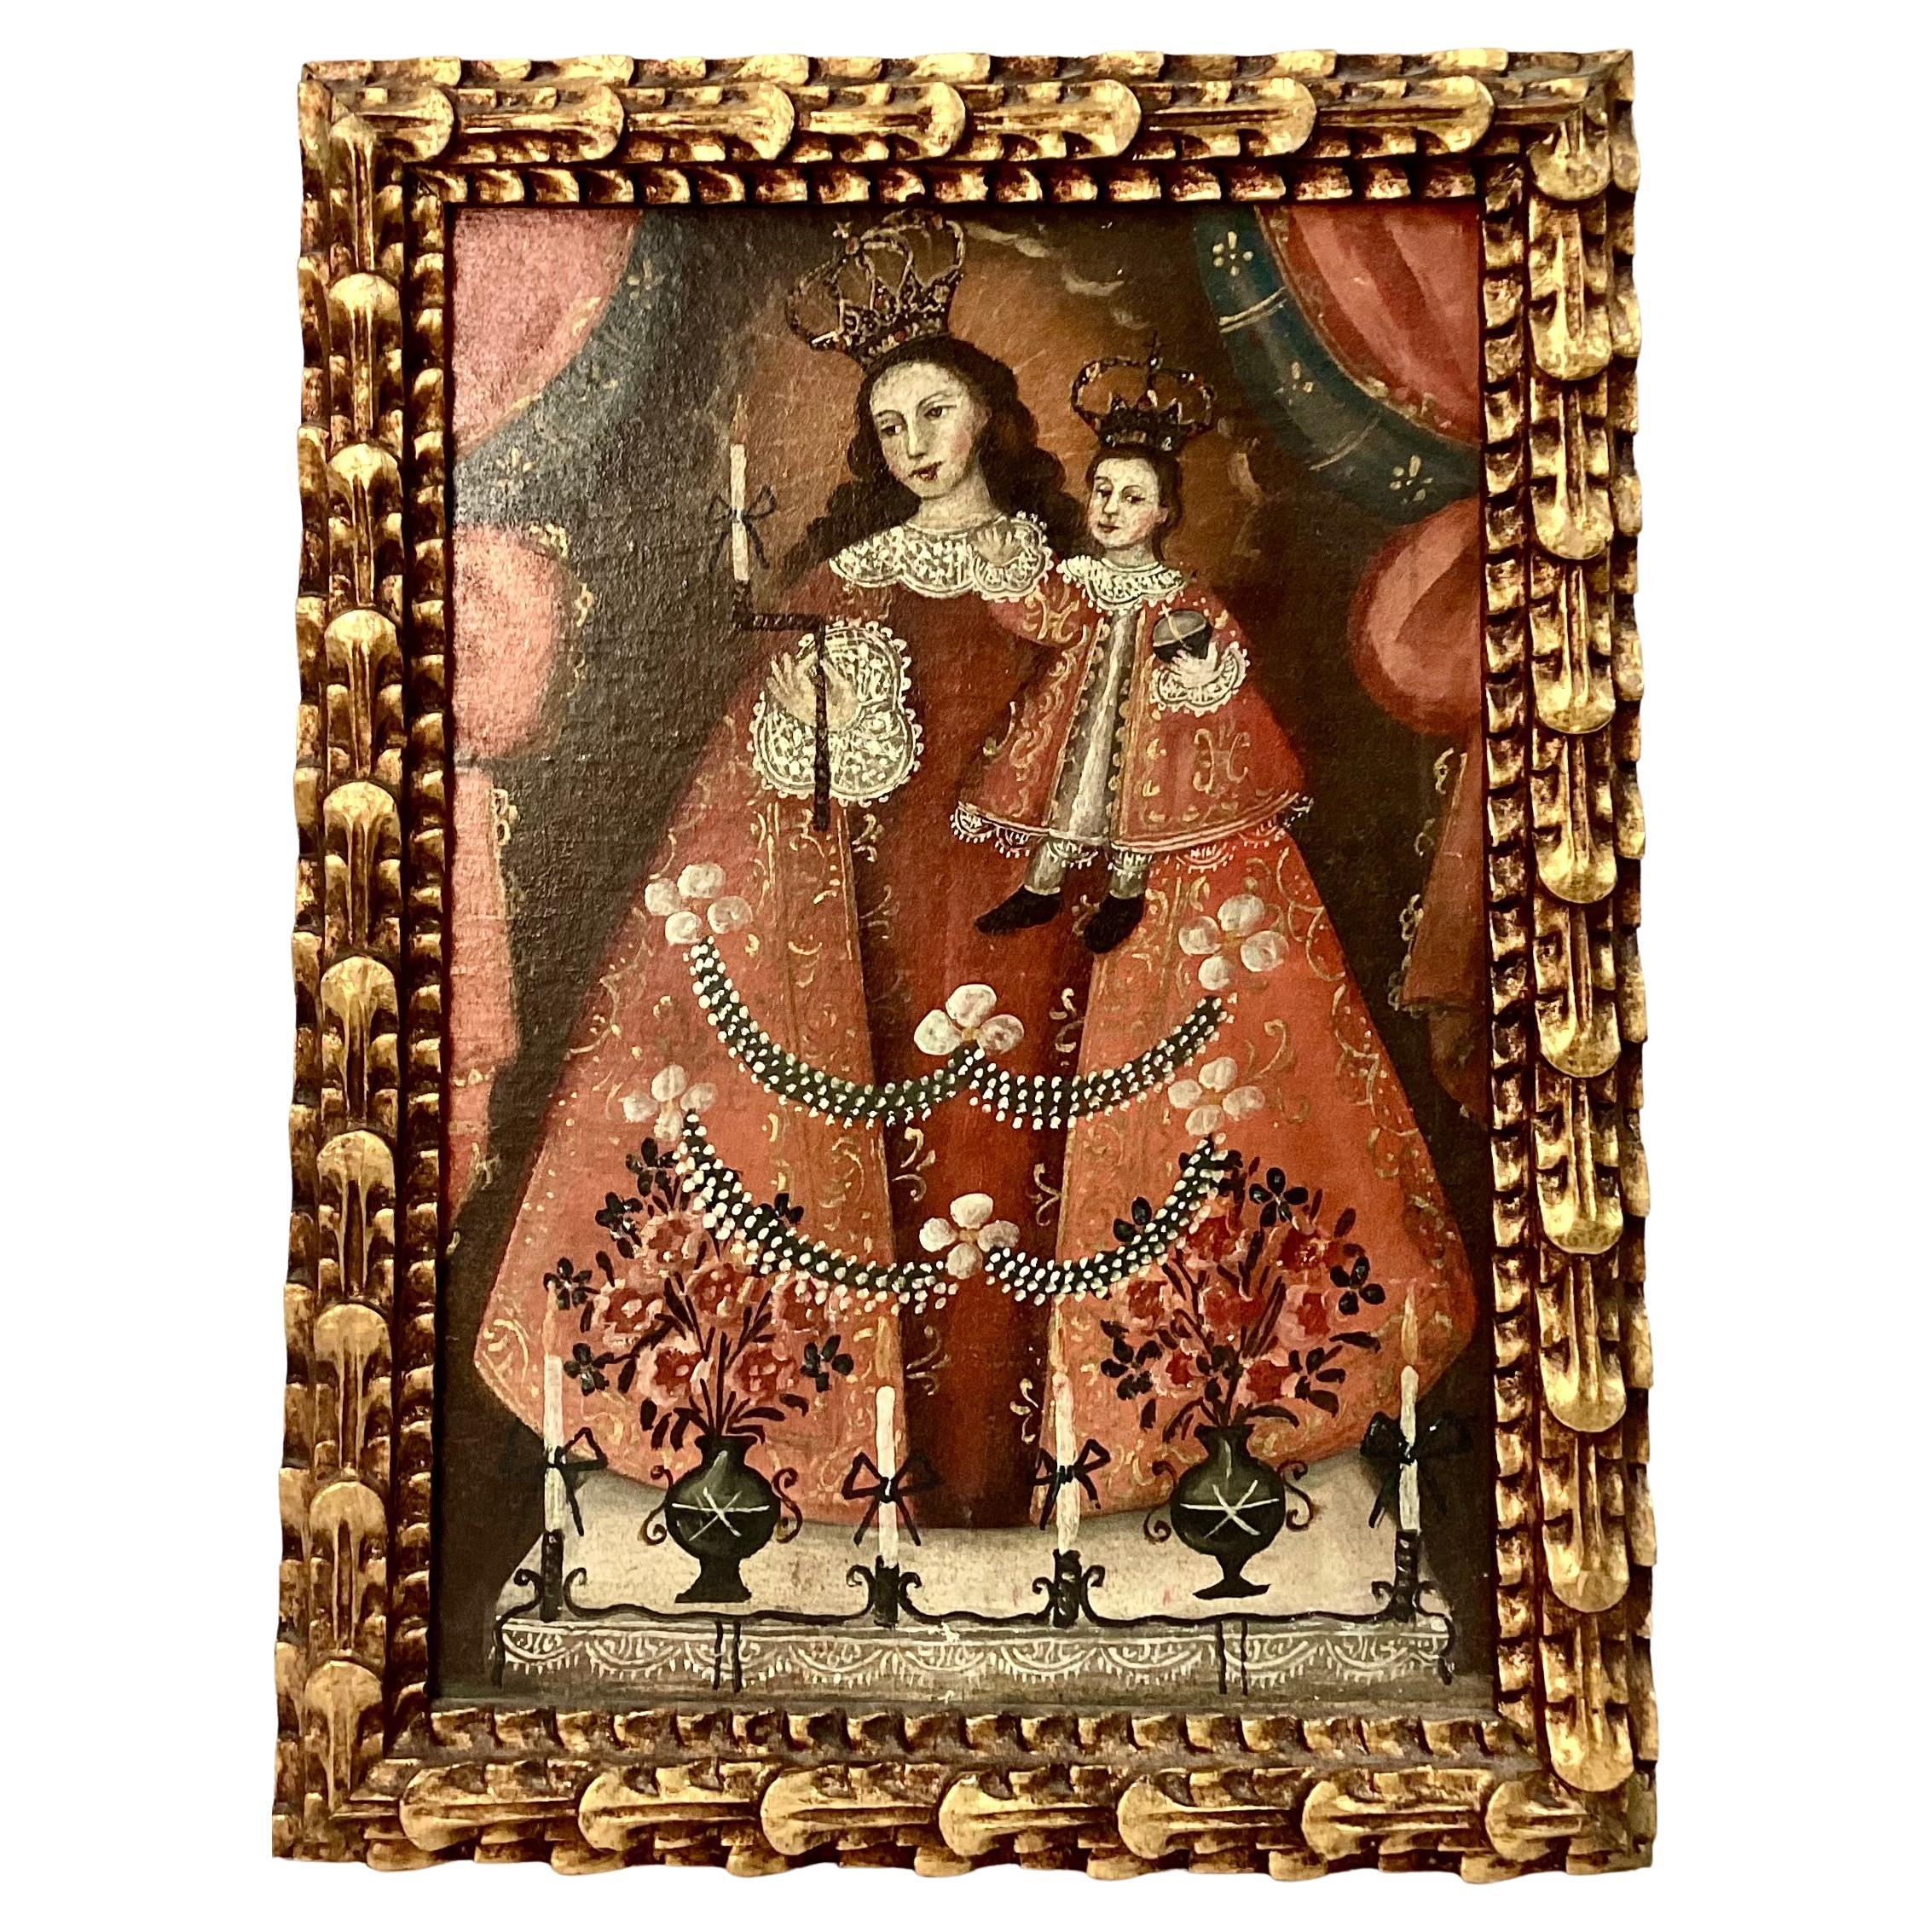 Cuzco School oil on canvas mounted on board, Madonna with Child. Depiction of a Colonial Style Madonna with child in her left arm, both wearing crowns. Carved gilt wood frame. Measurements include frame.
The unidentified artist who painted this was